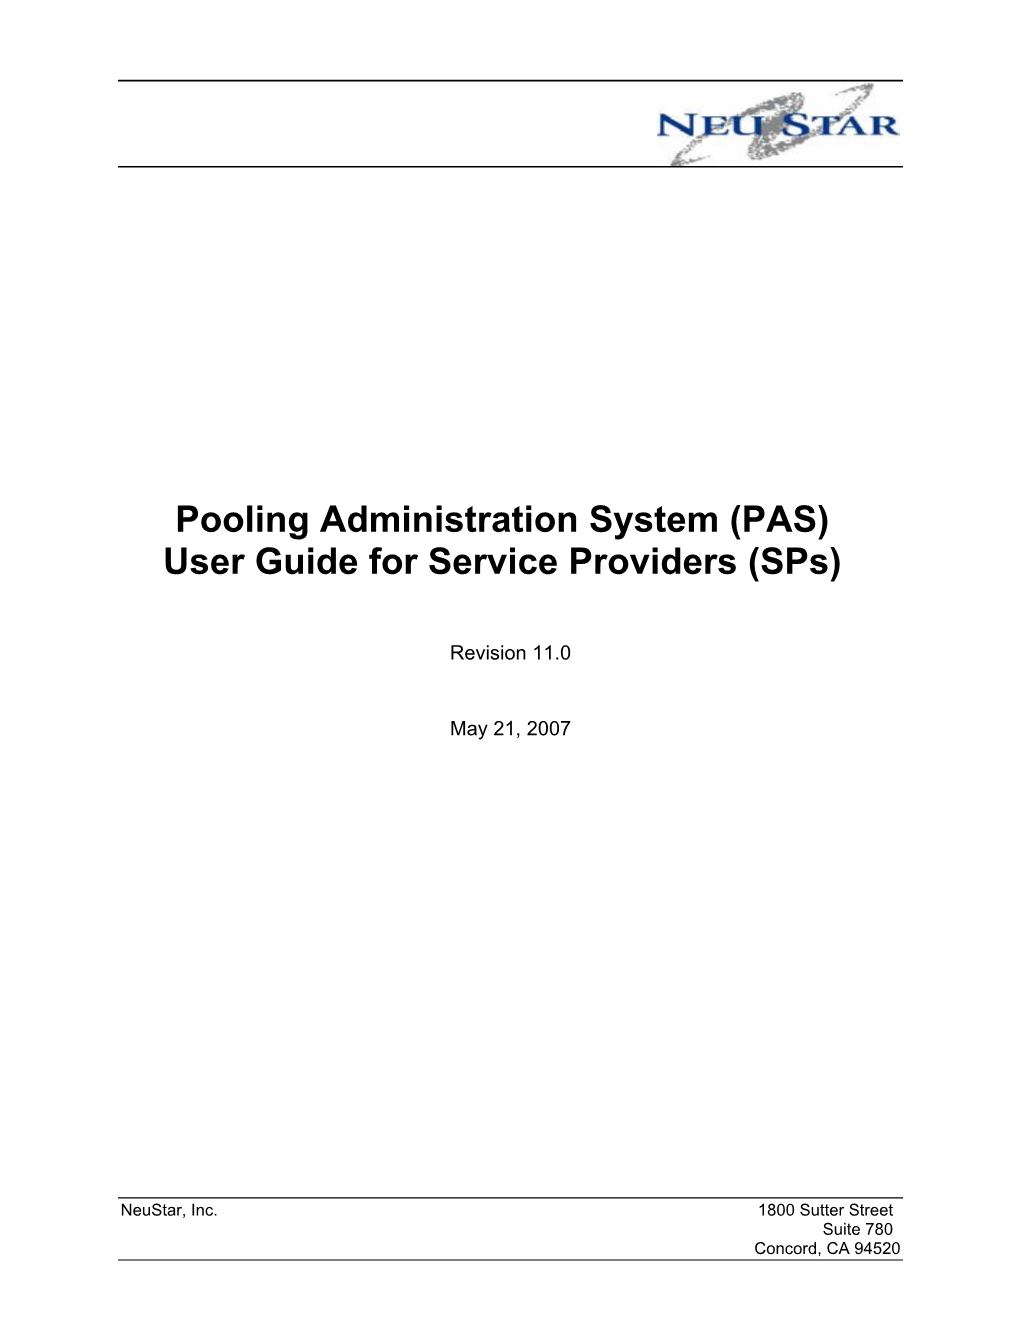 Pooling Administration System (PAS) User Guide for Service Providers (Sps)